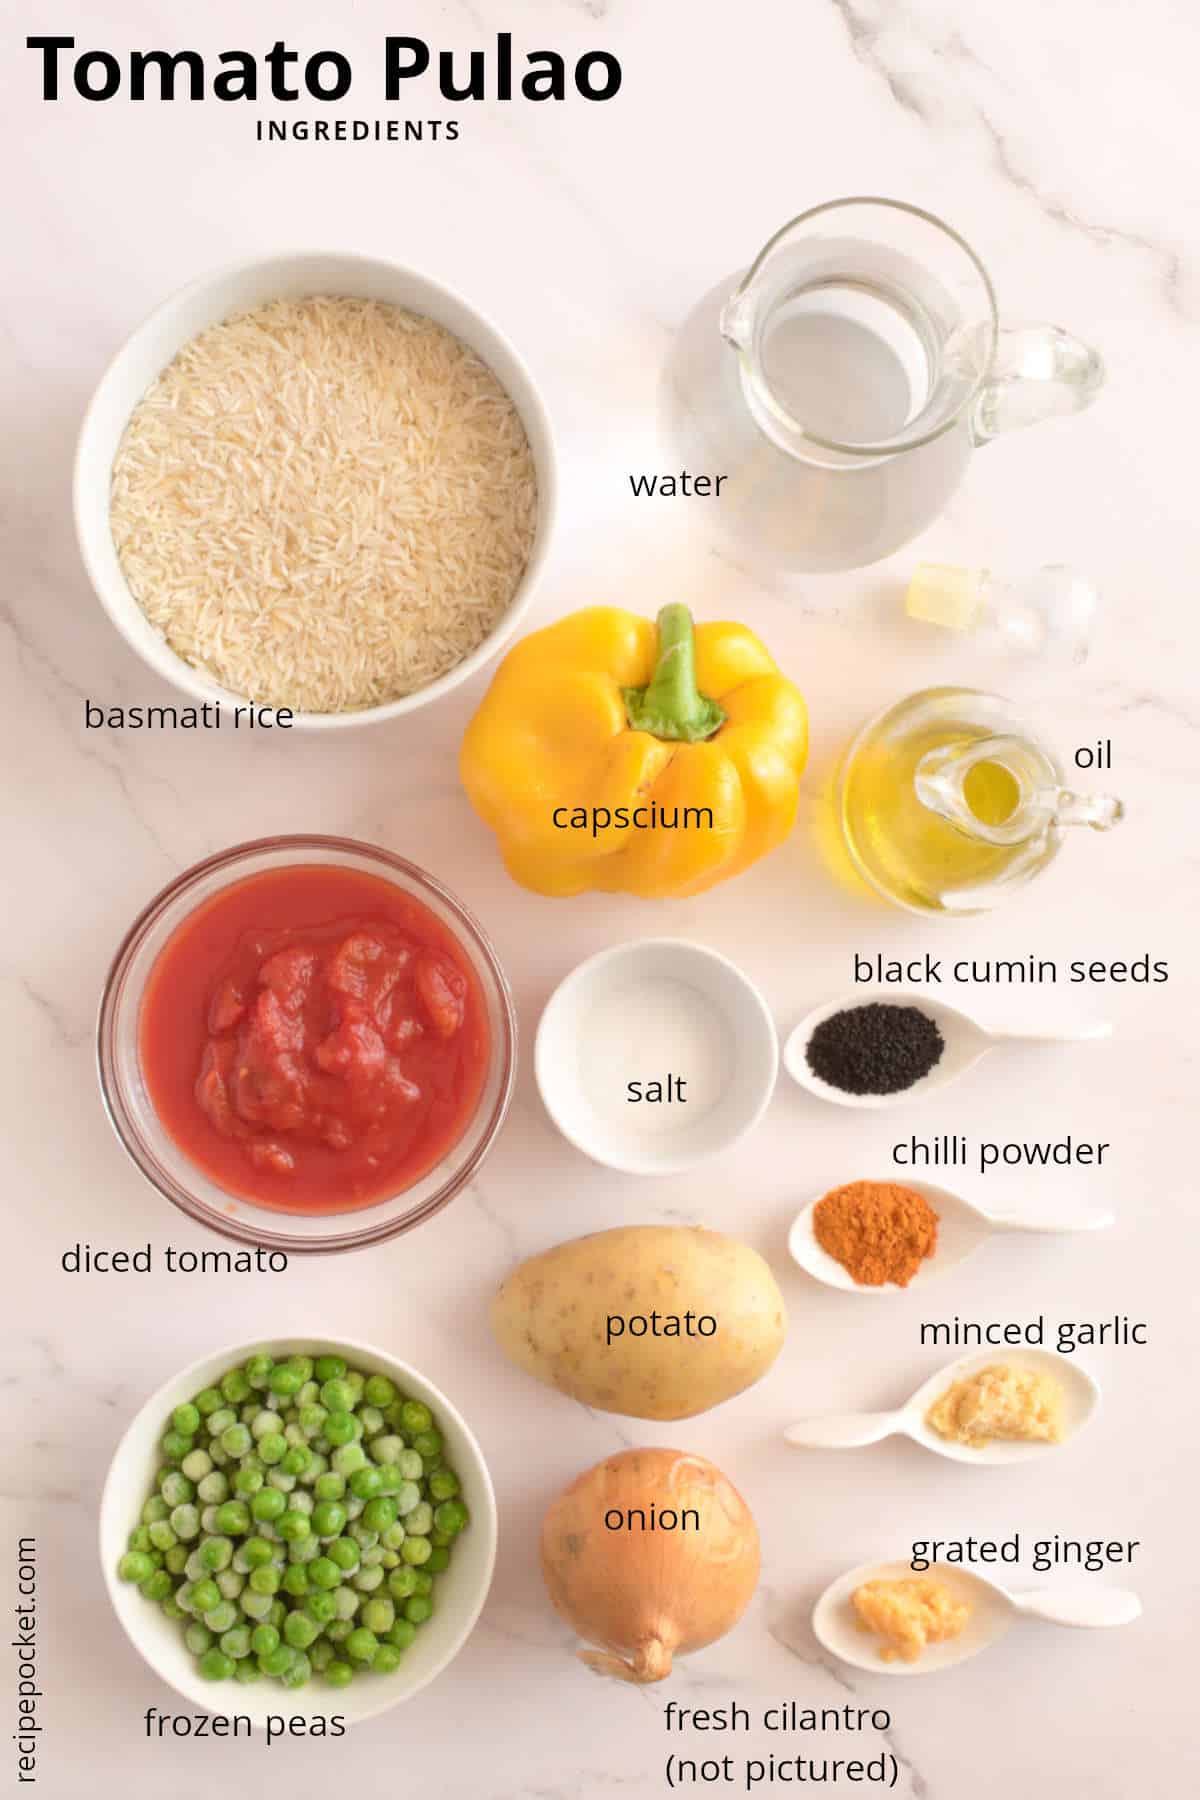 Image showing ingredients needed for tomato pulao recipe.